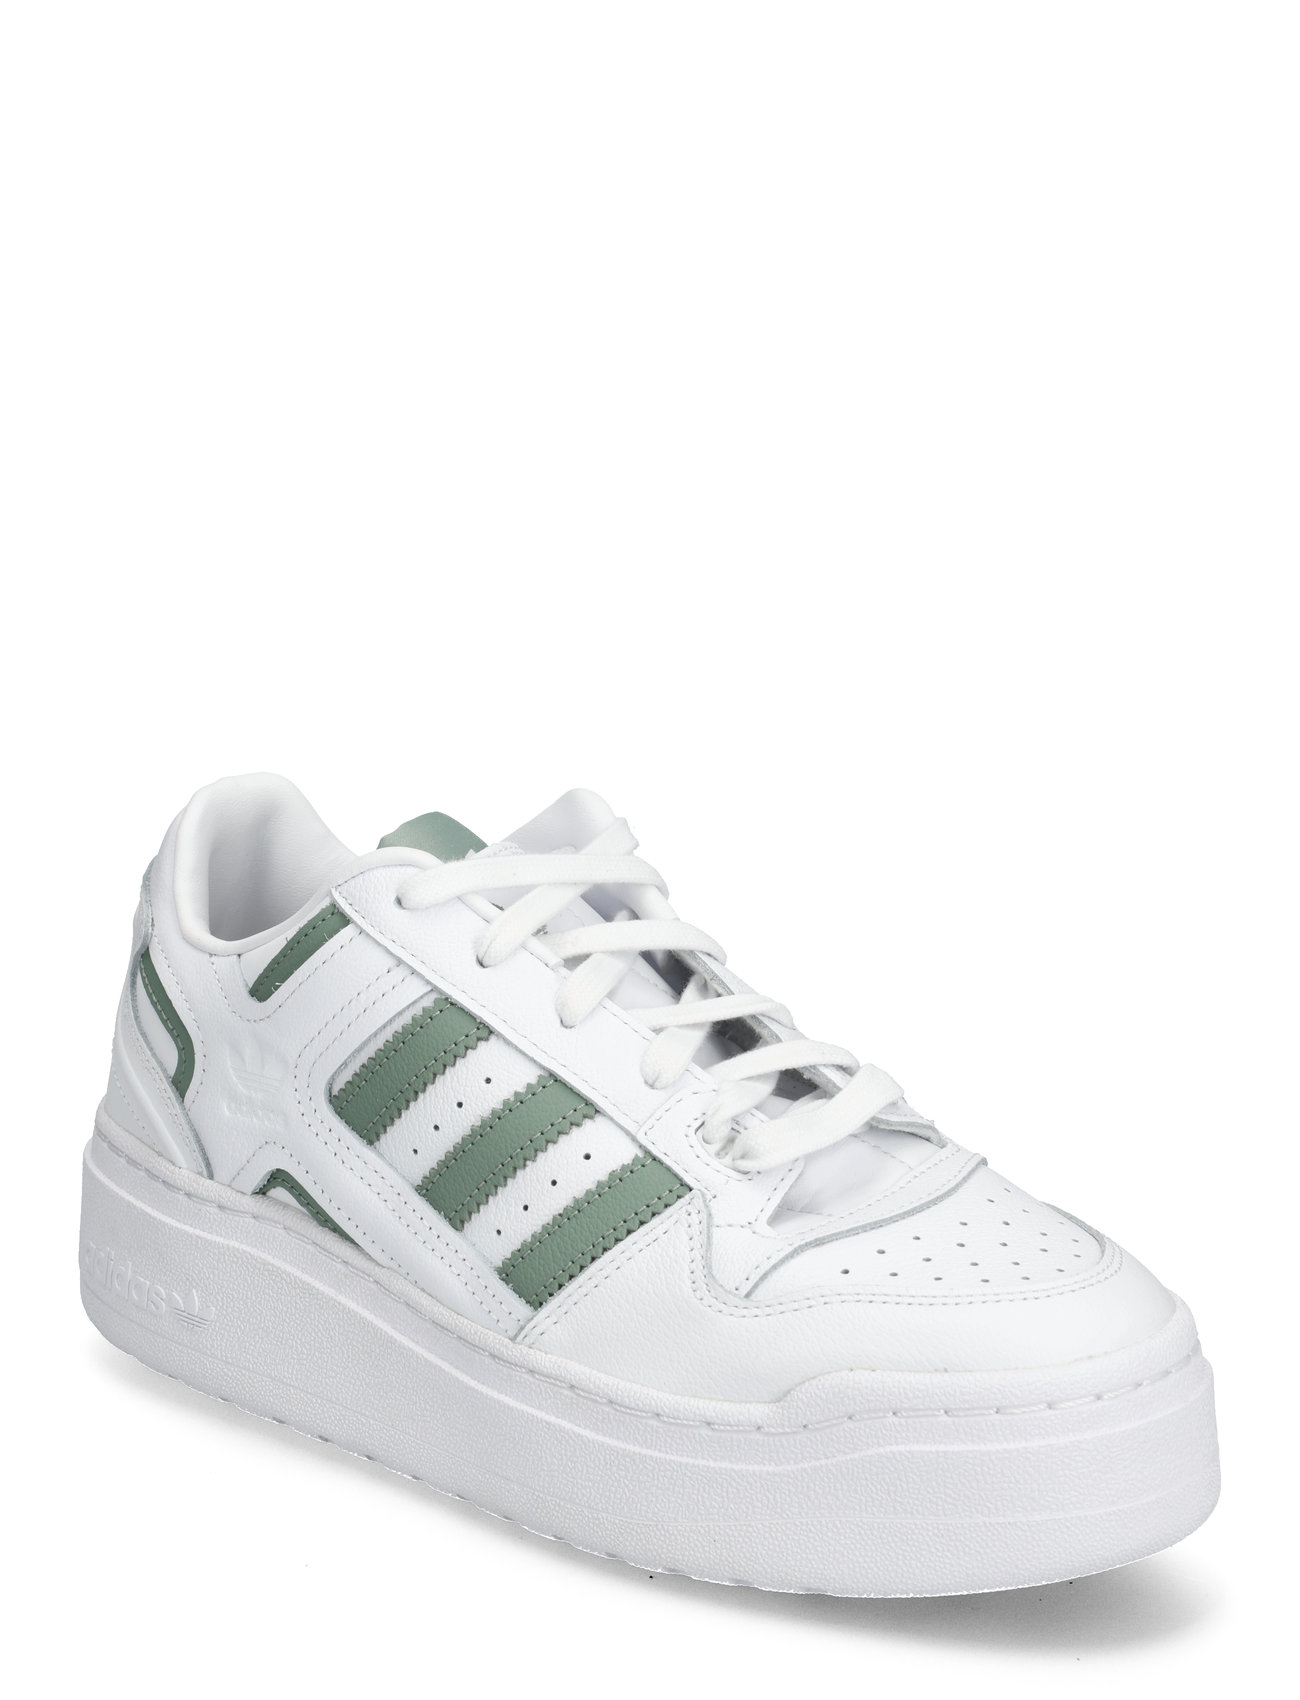 "adidas Originals" "Forum Xlg W Sport Sneakers Low-top White Adidas